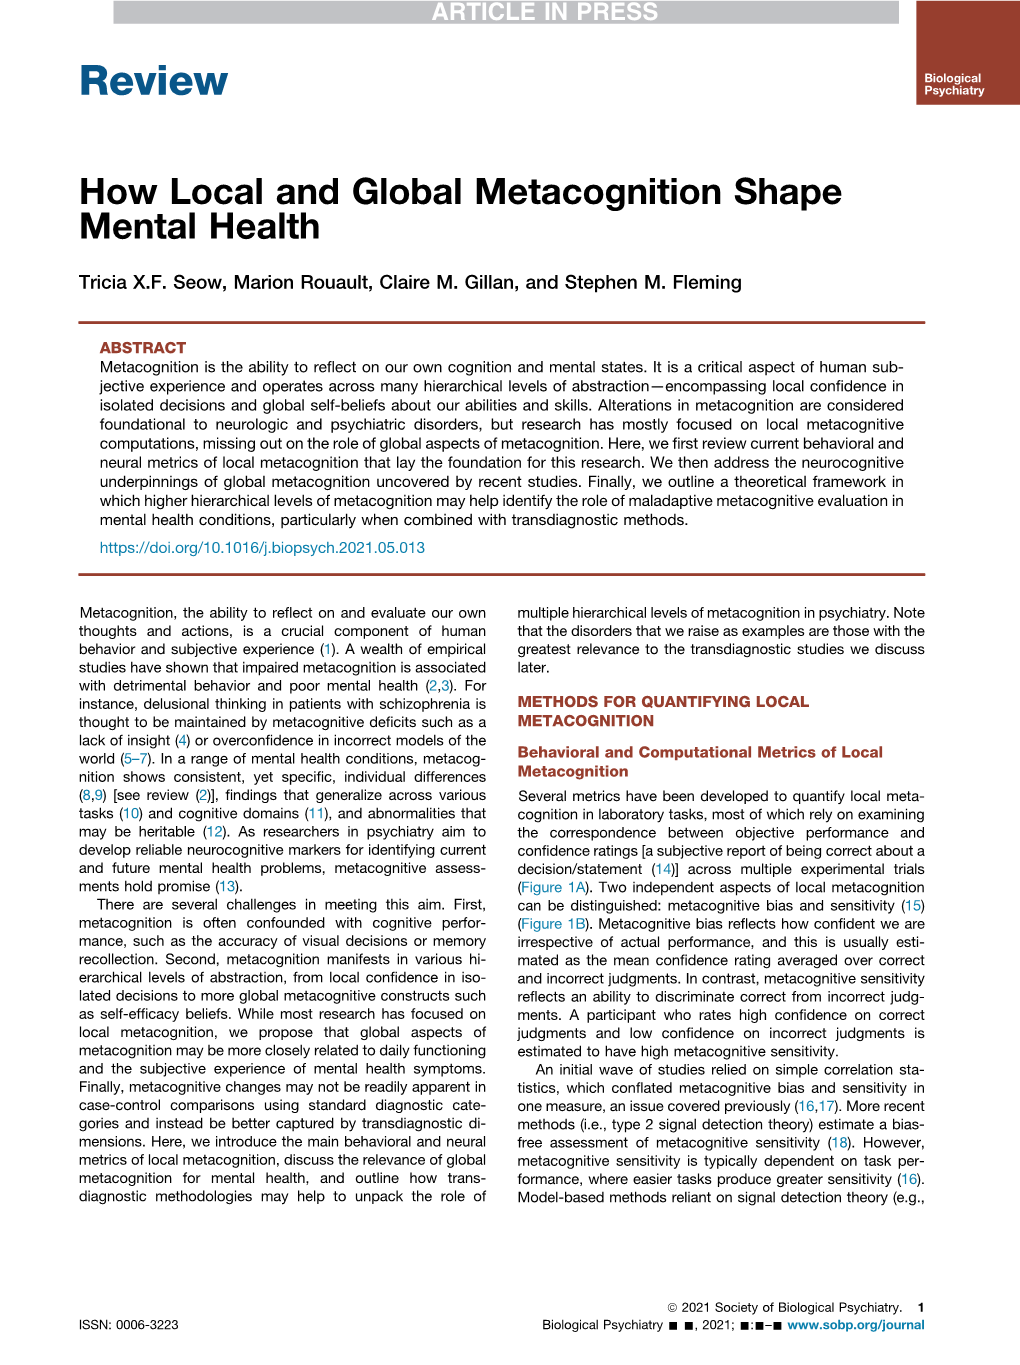 How Local and Global Metacognition Shape Mental Health